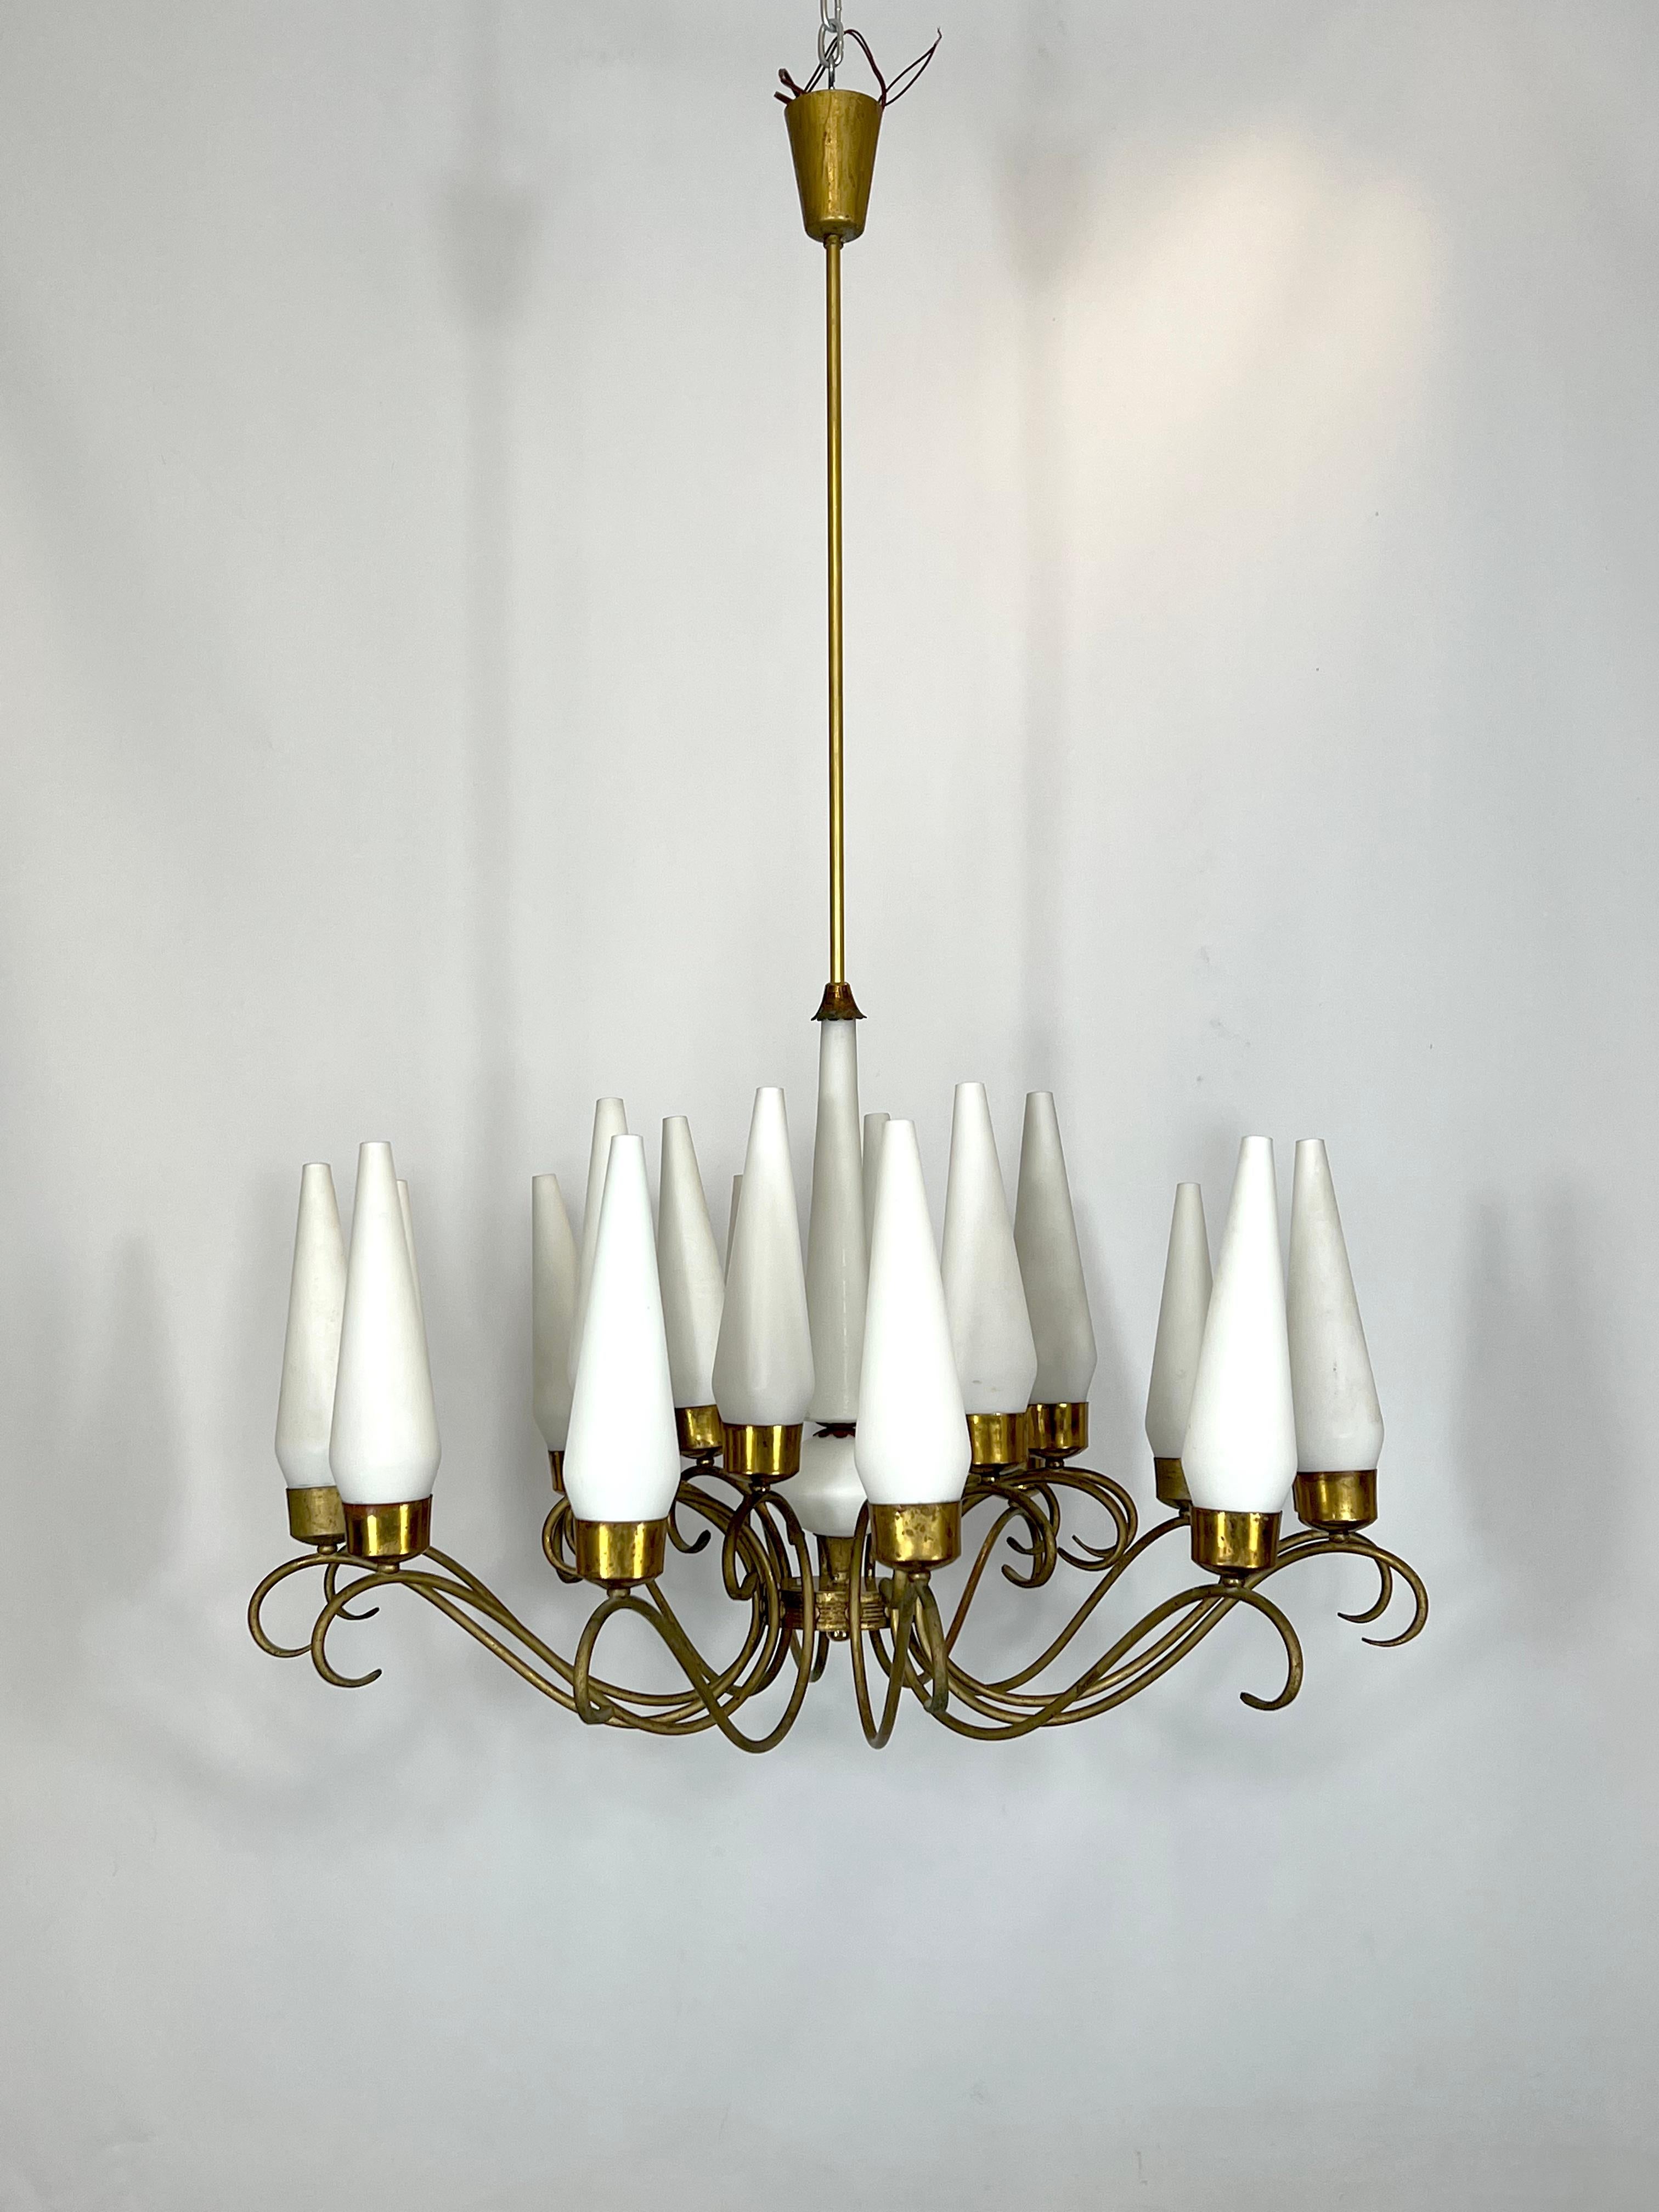 Good vintage condition with trace of age and use for this mid-century chandelier produced in Italy during the 50s and made from brass and opaline glass. No cracks or chips, patina on the brass. Full working with EU standard, adaptable on demand for